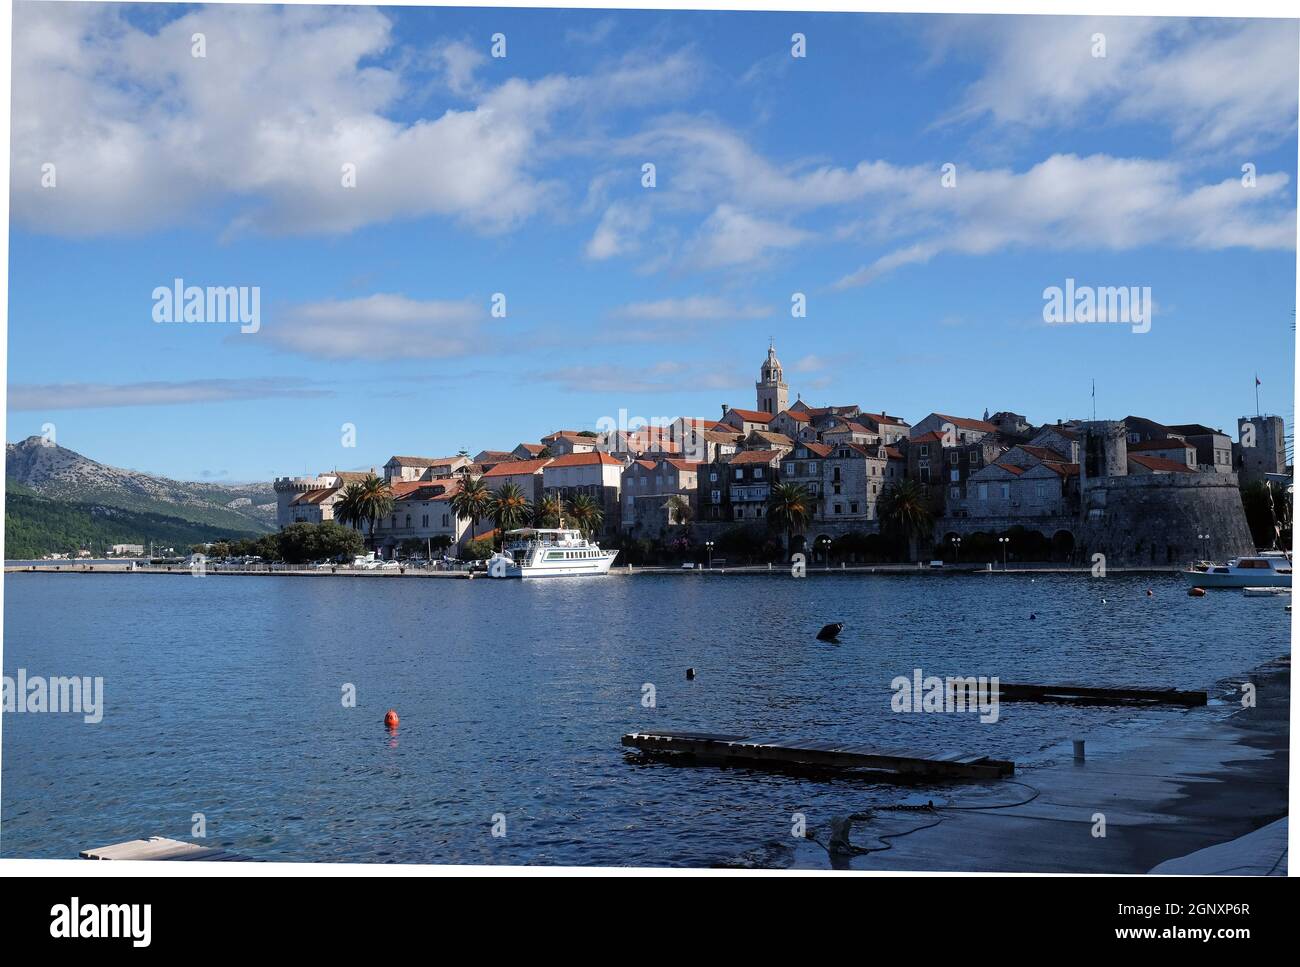 Seafront view at picturesque medieval Dalmatian town Korcula, Croatia Stock Photo